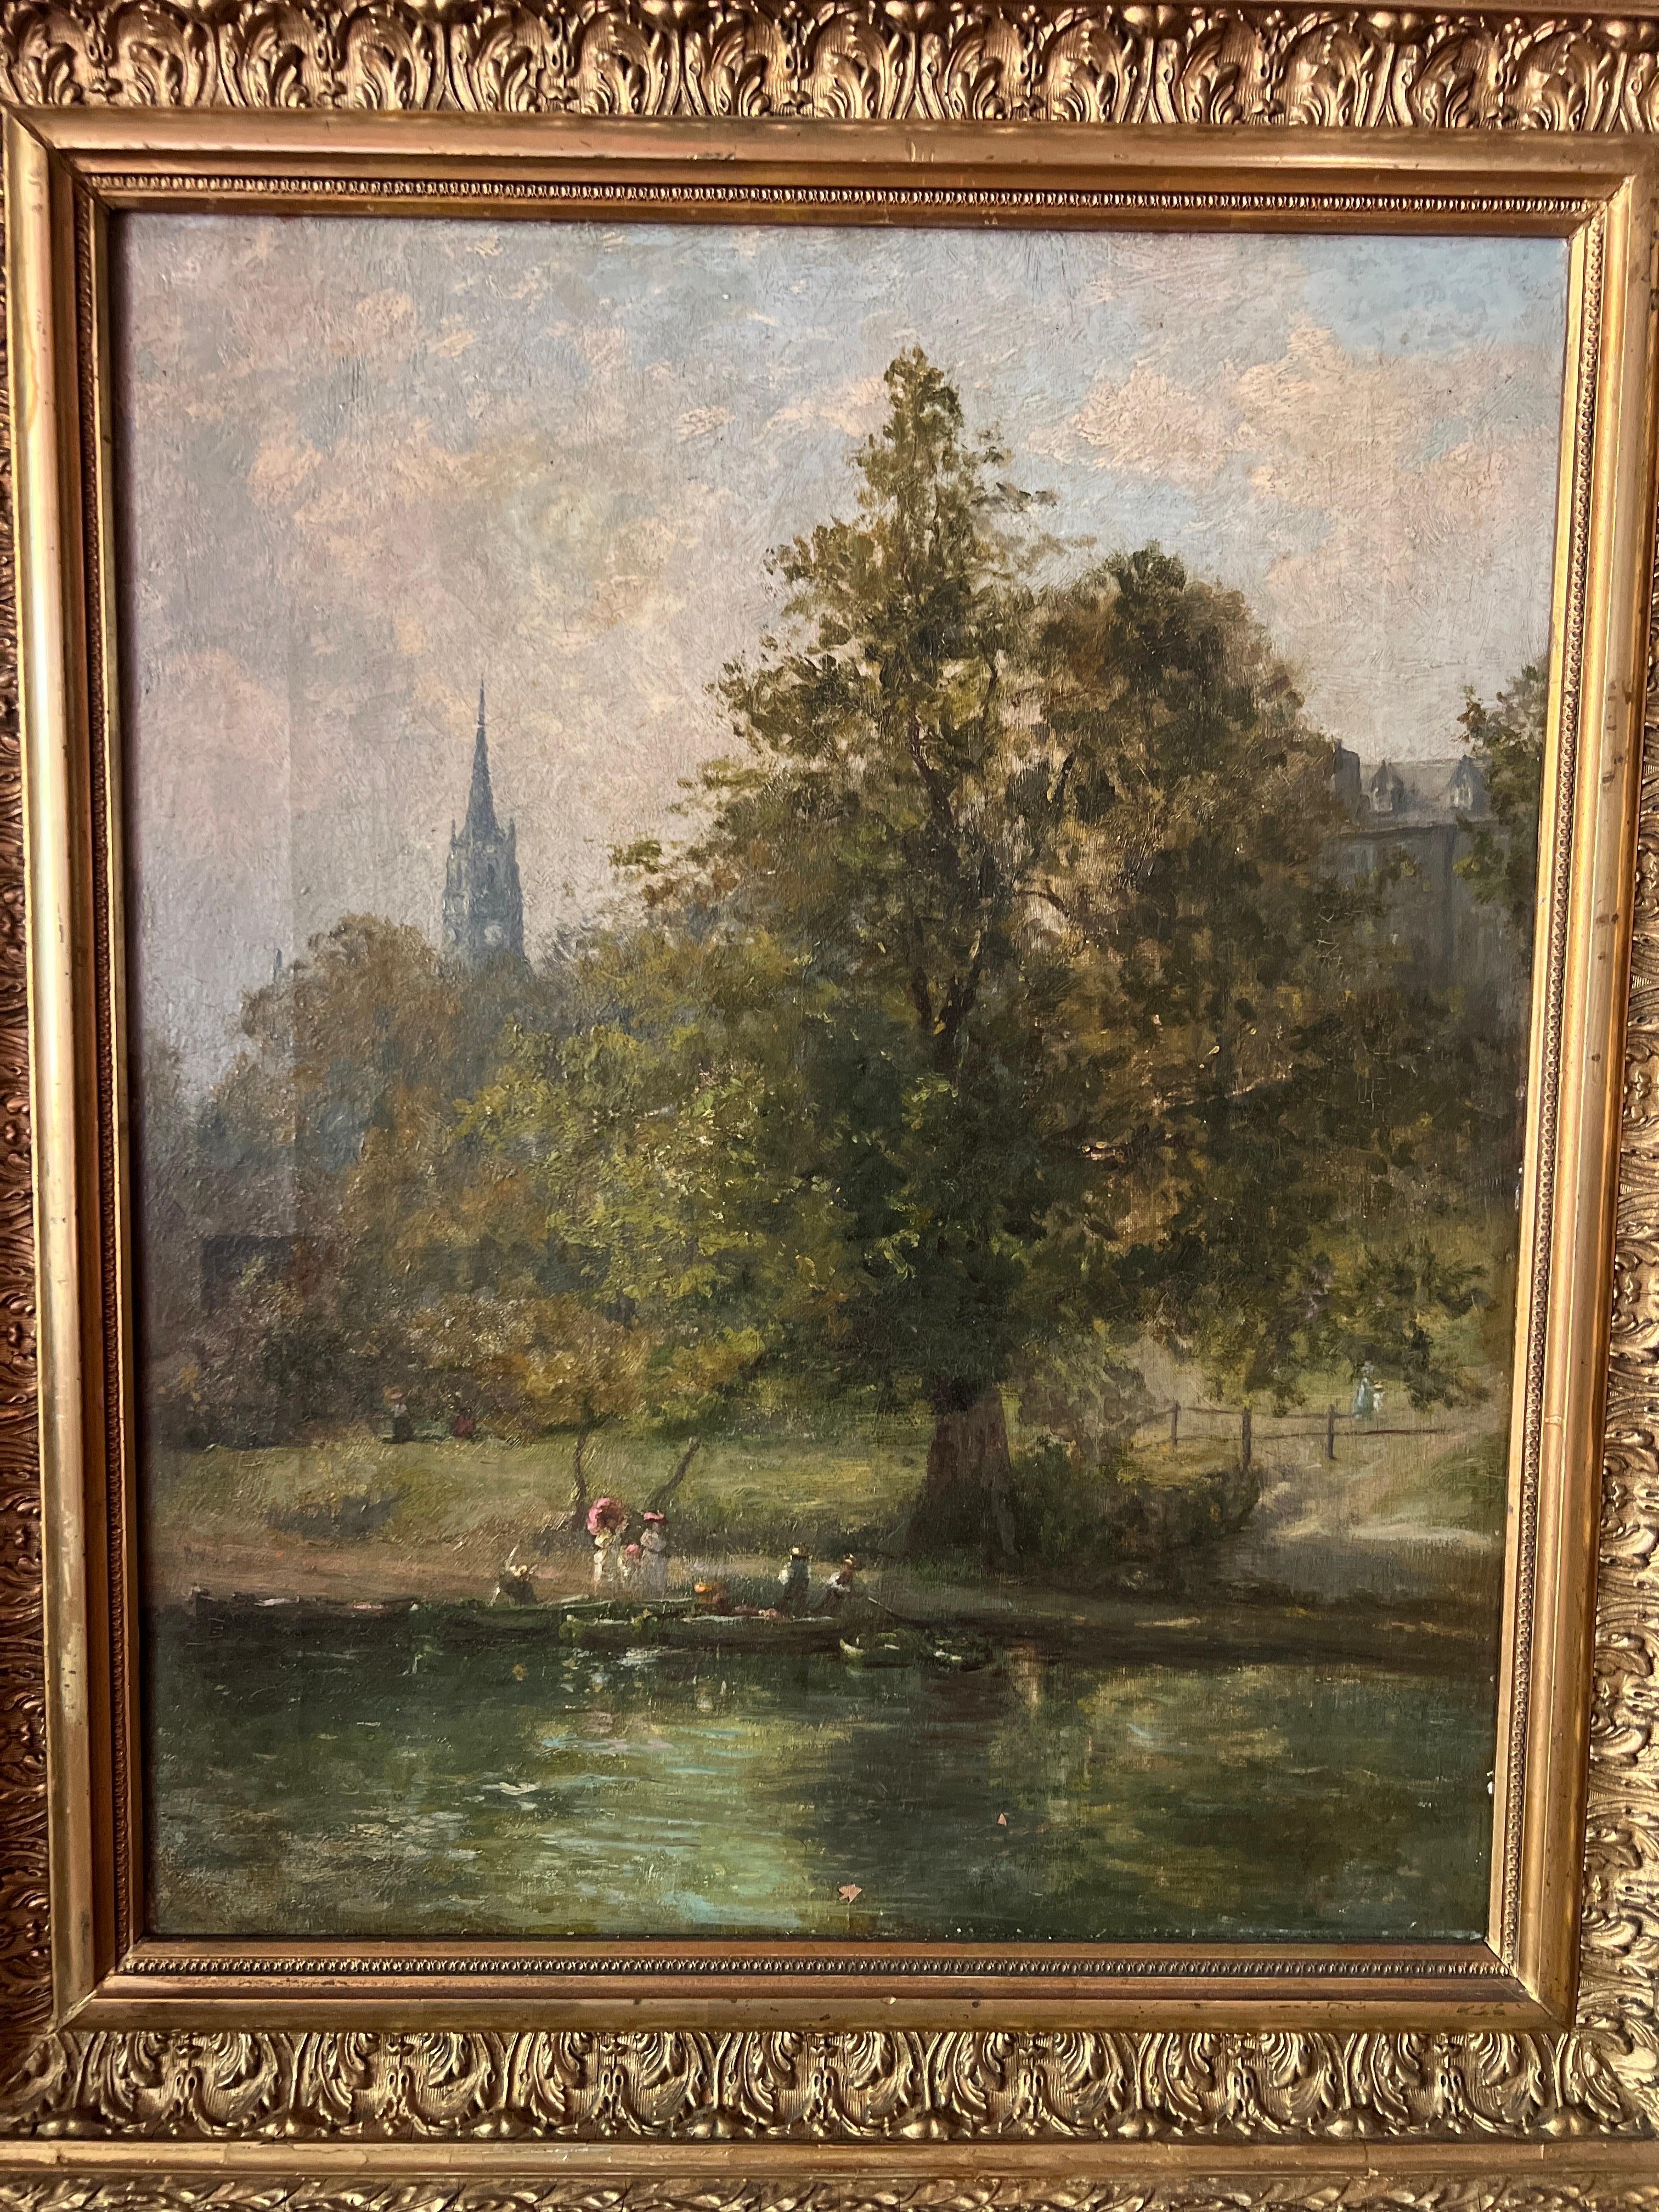 English School, 19th century.

A fine quality English School oil painting on canvas of a duck pond which has a small family boarding a tiny boat. Surrounded by lush trees, a dirt path and Salisbury church in the background. The painting is signed by